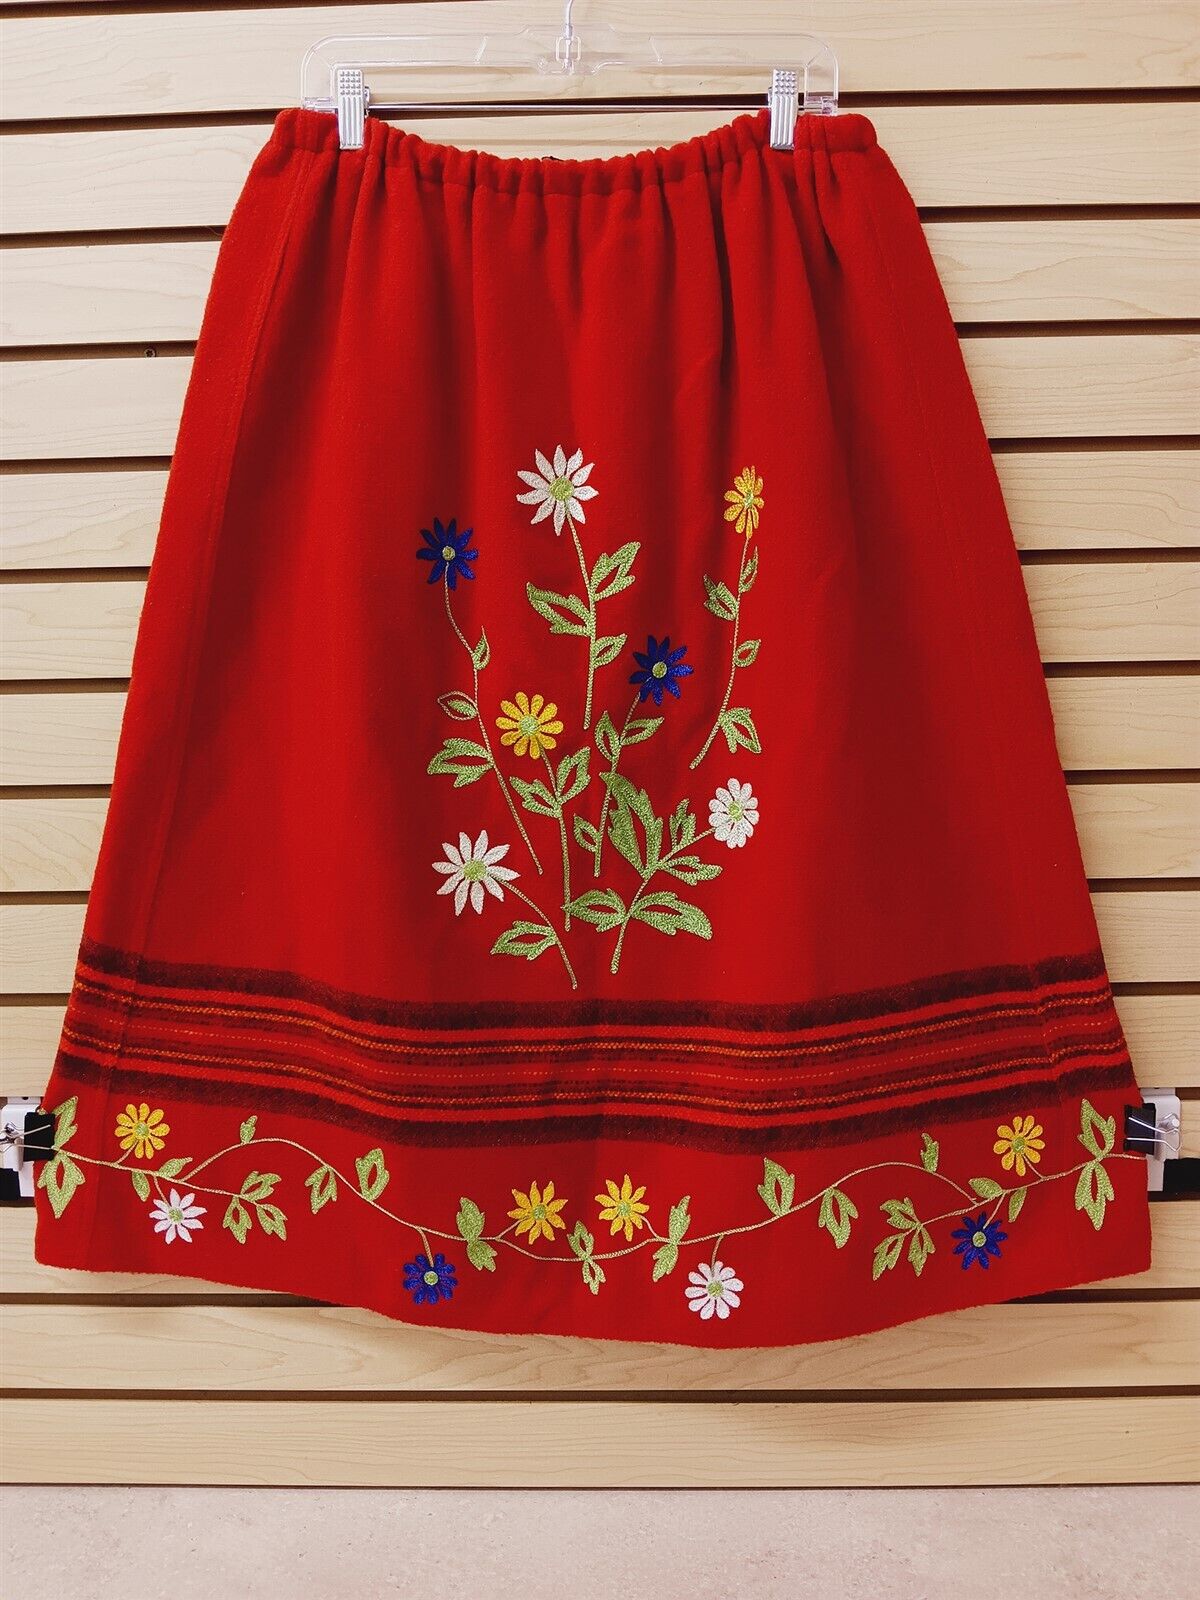 NICE 2XL RED WOOL EMBROIDERED FLOWER DESIGN NATIVE AMERICAN INDIAN DANCE SKIRT